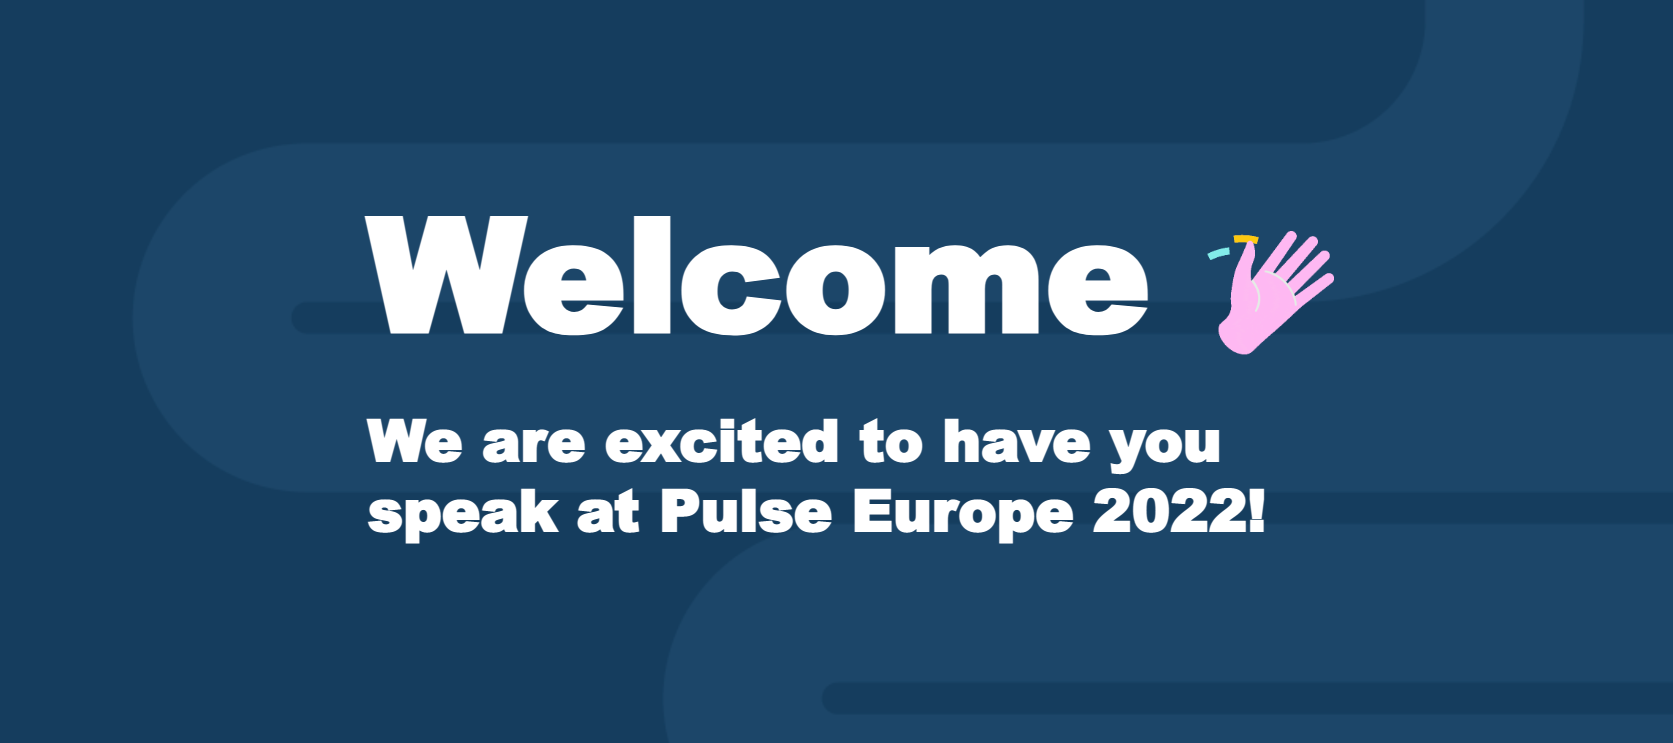 Speaking at Pulse Europe 2022? Show us a lil teaser 🤹🏼‍♀️